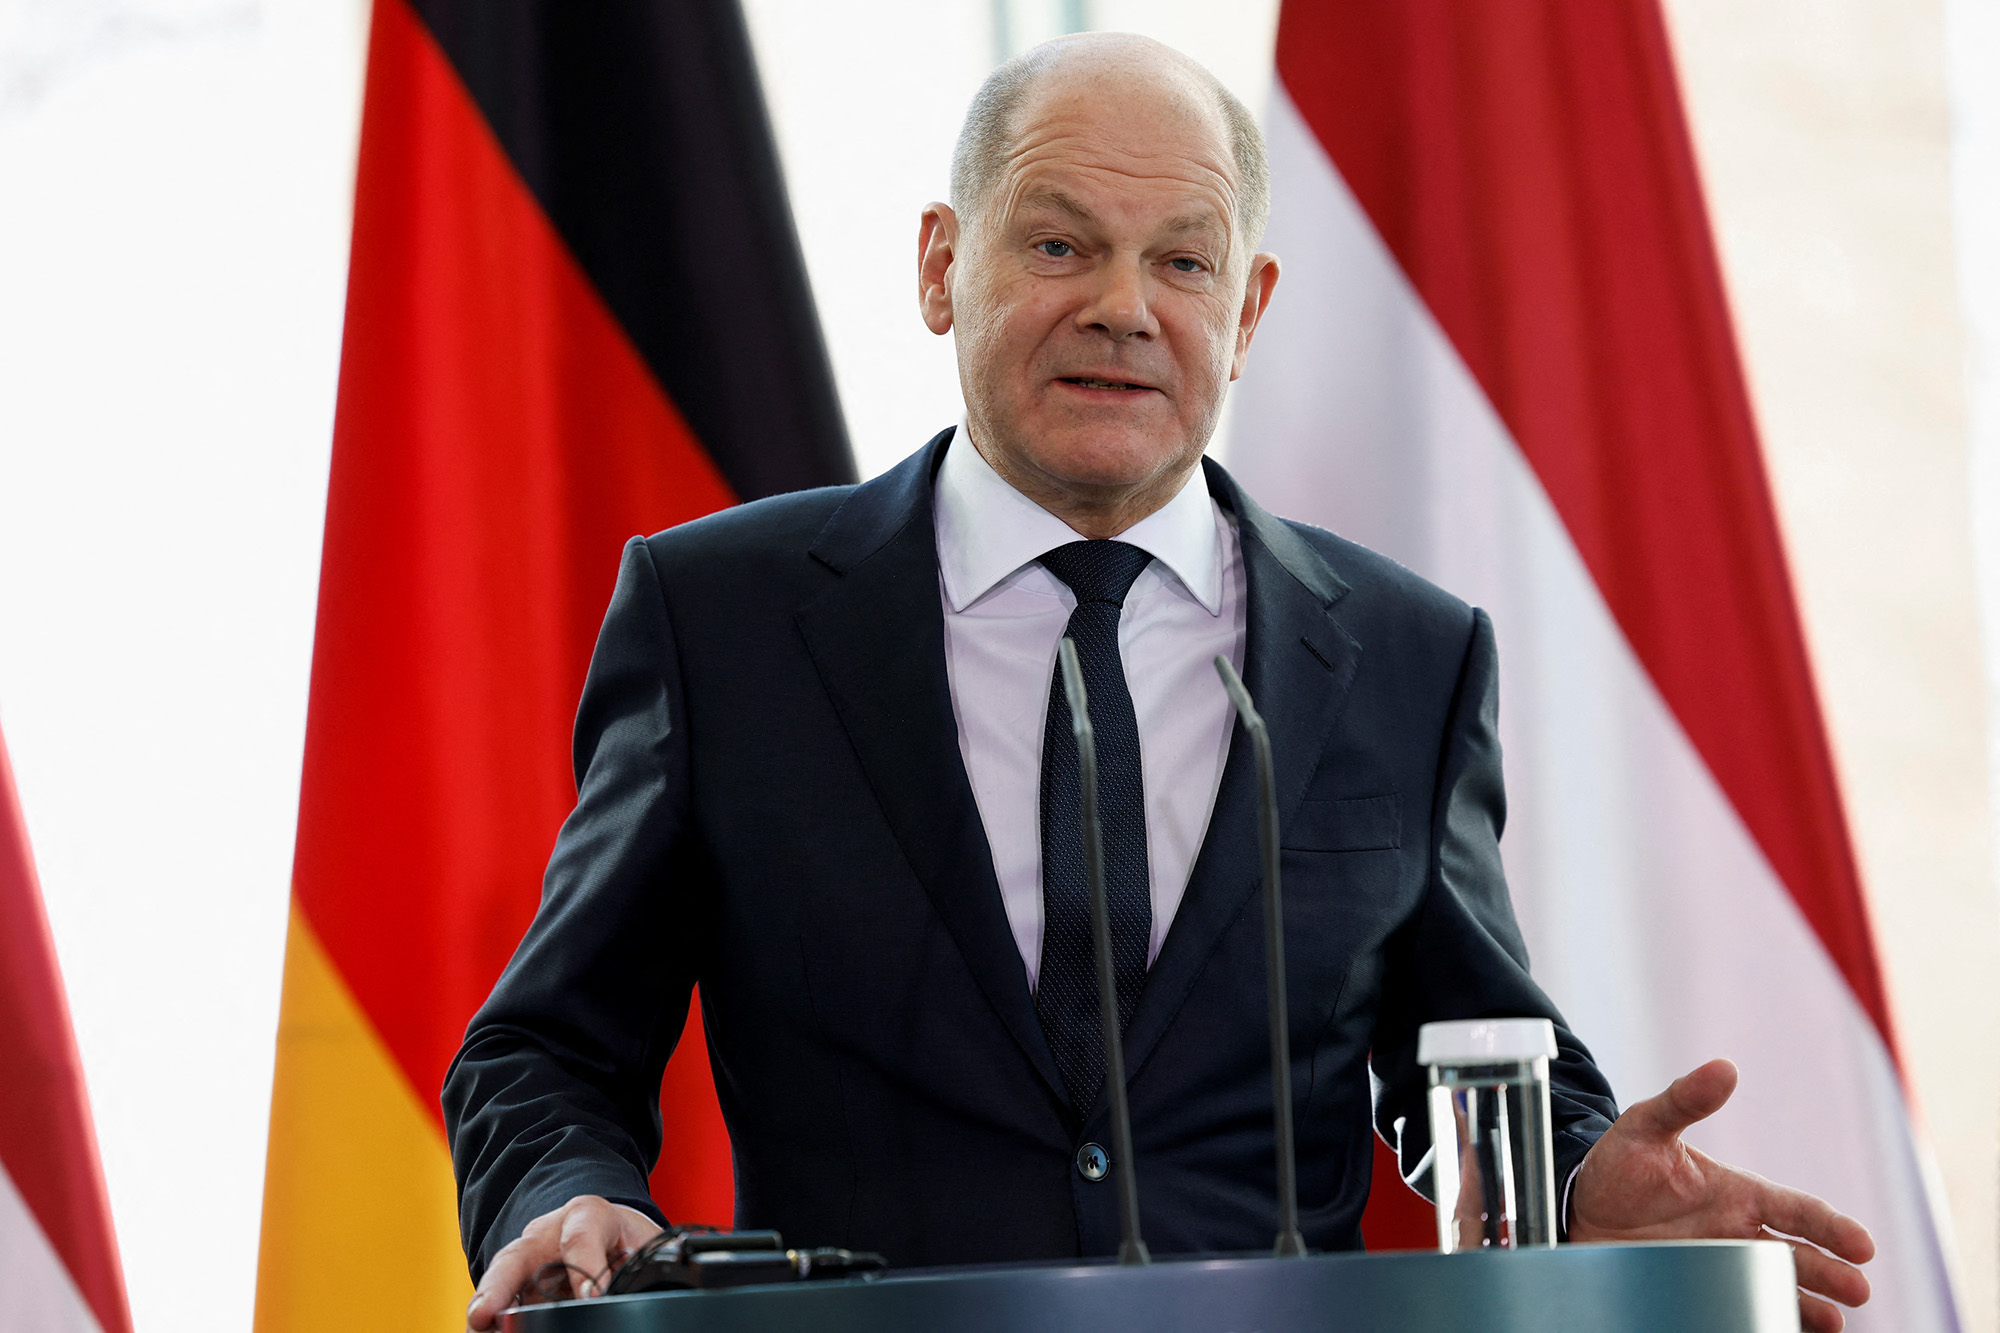 German Chancellor Olaf Scholz speaks during a news conference in Berlin, Germany, on March 1.